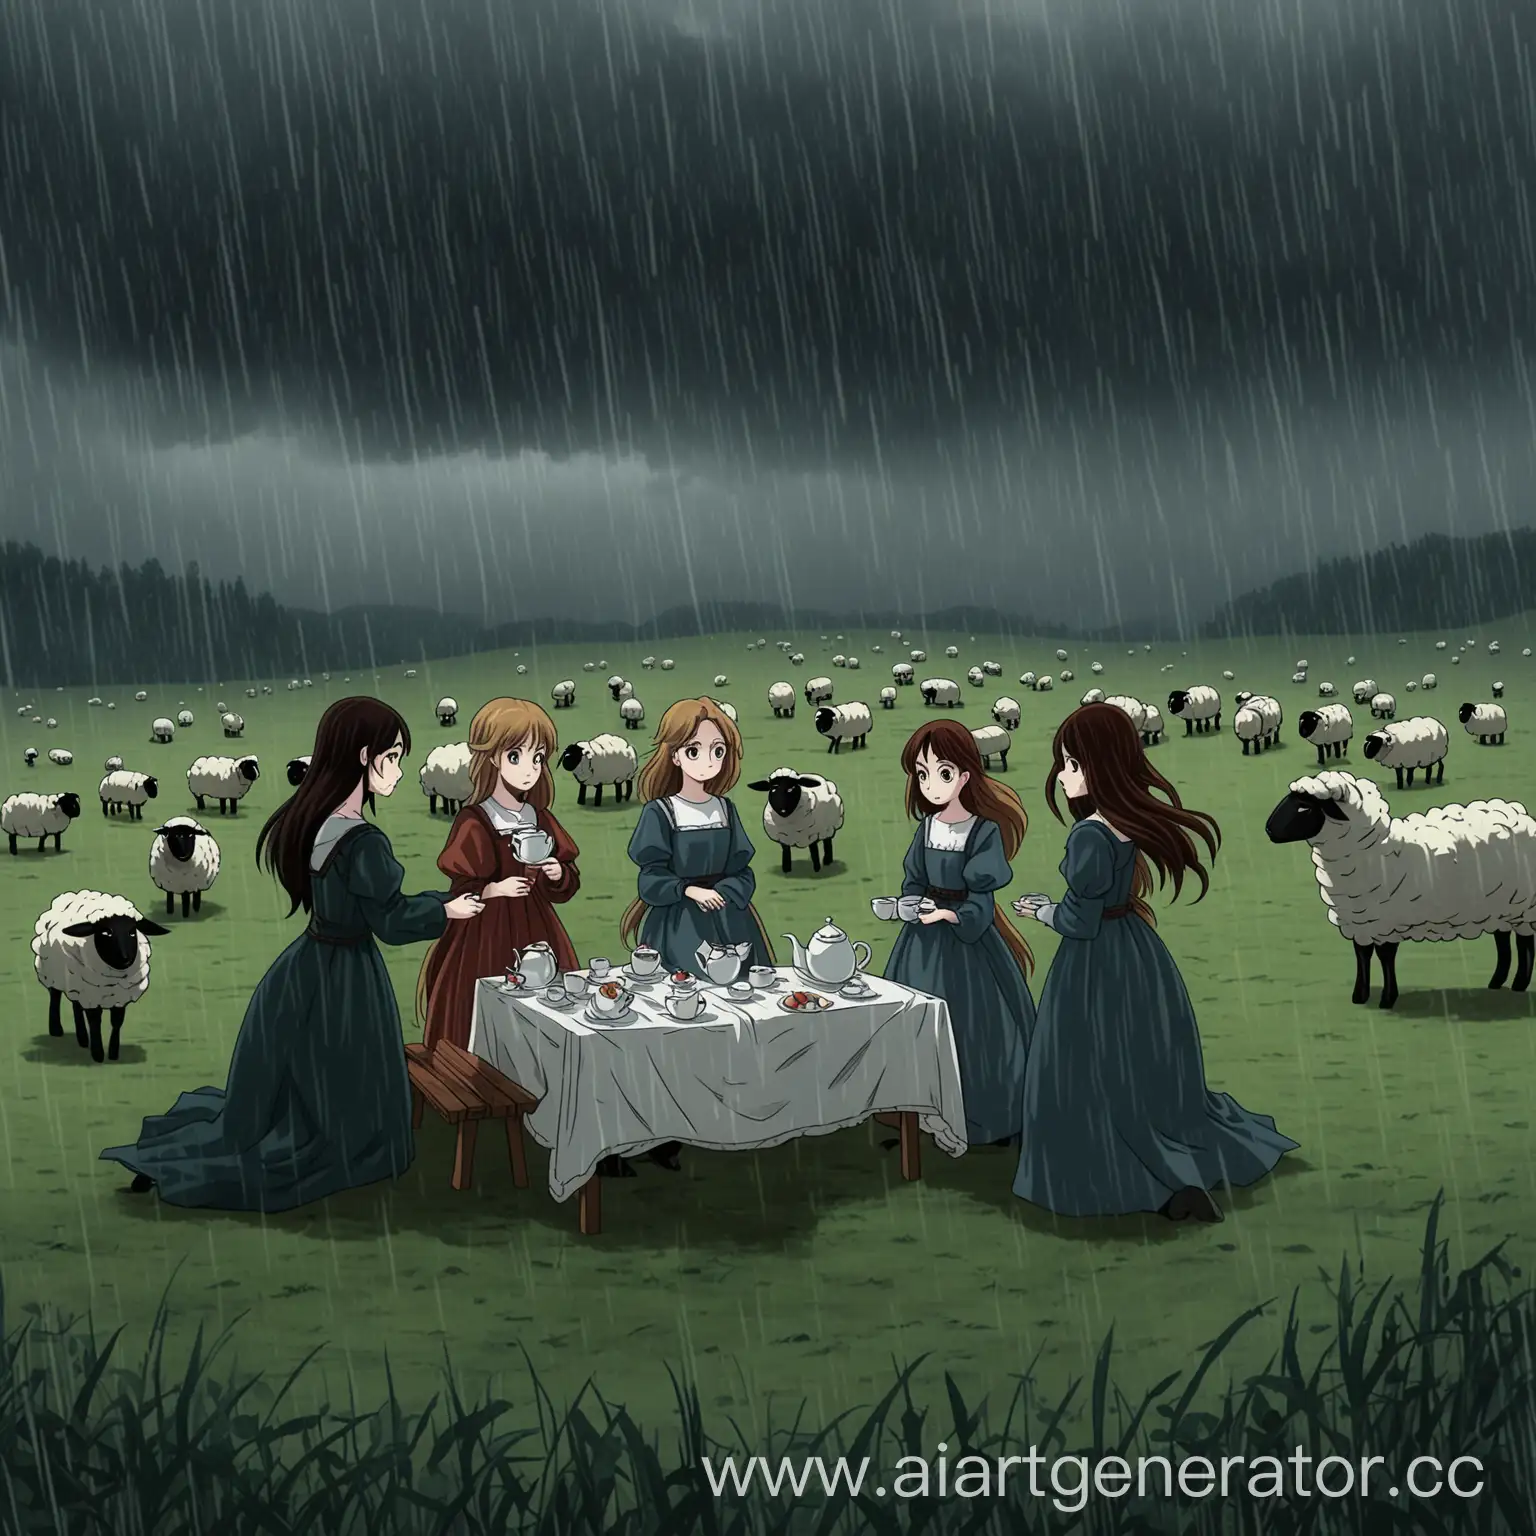 Anime-Girls-Tea-Party-in-a-Rainy-Meadow-with-Sheep